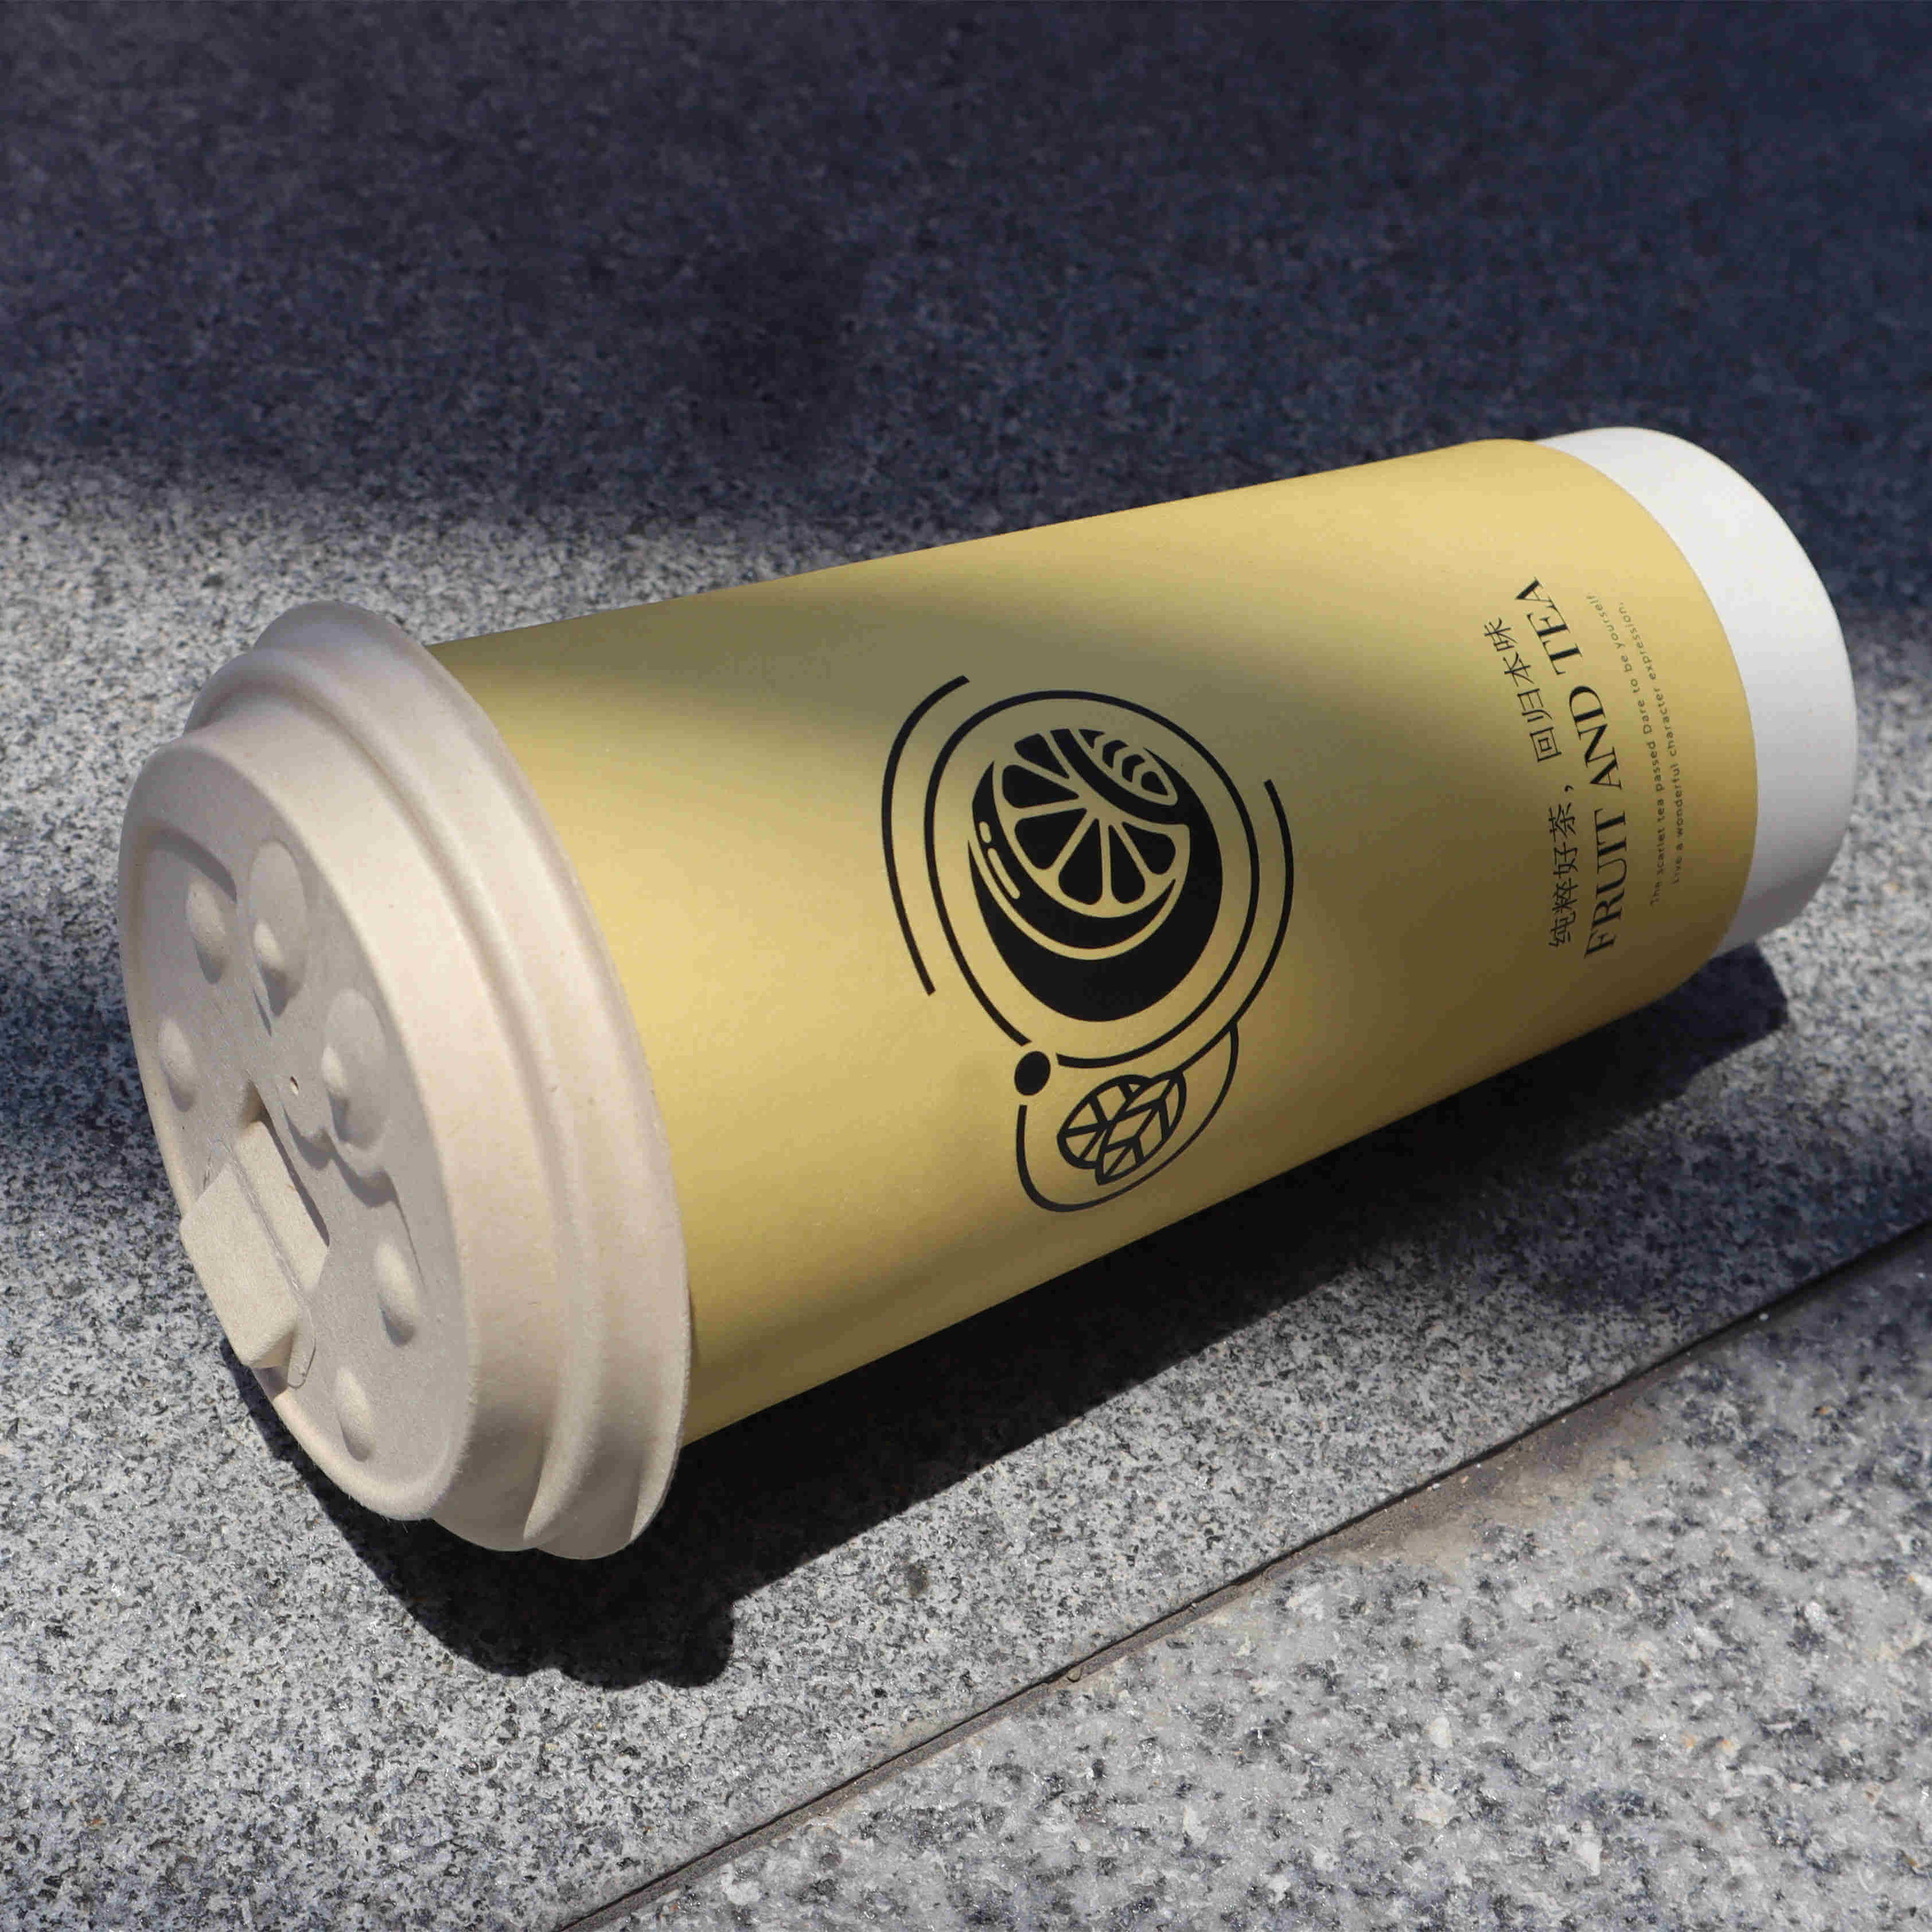 16oz coffee cup lids recyclable, pulp packaging manufacturer